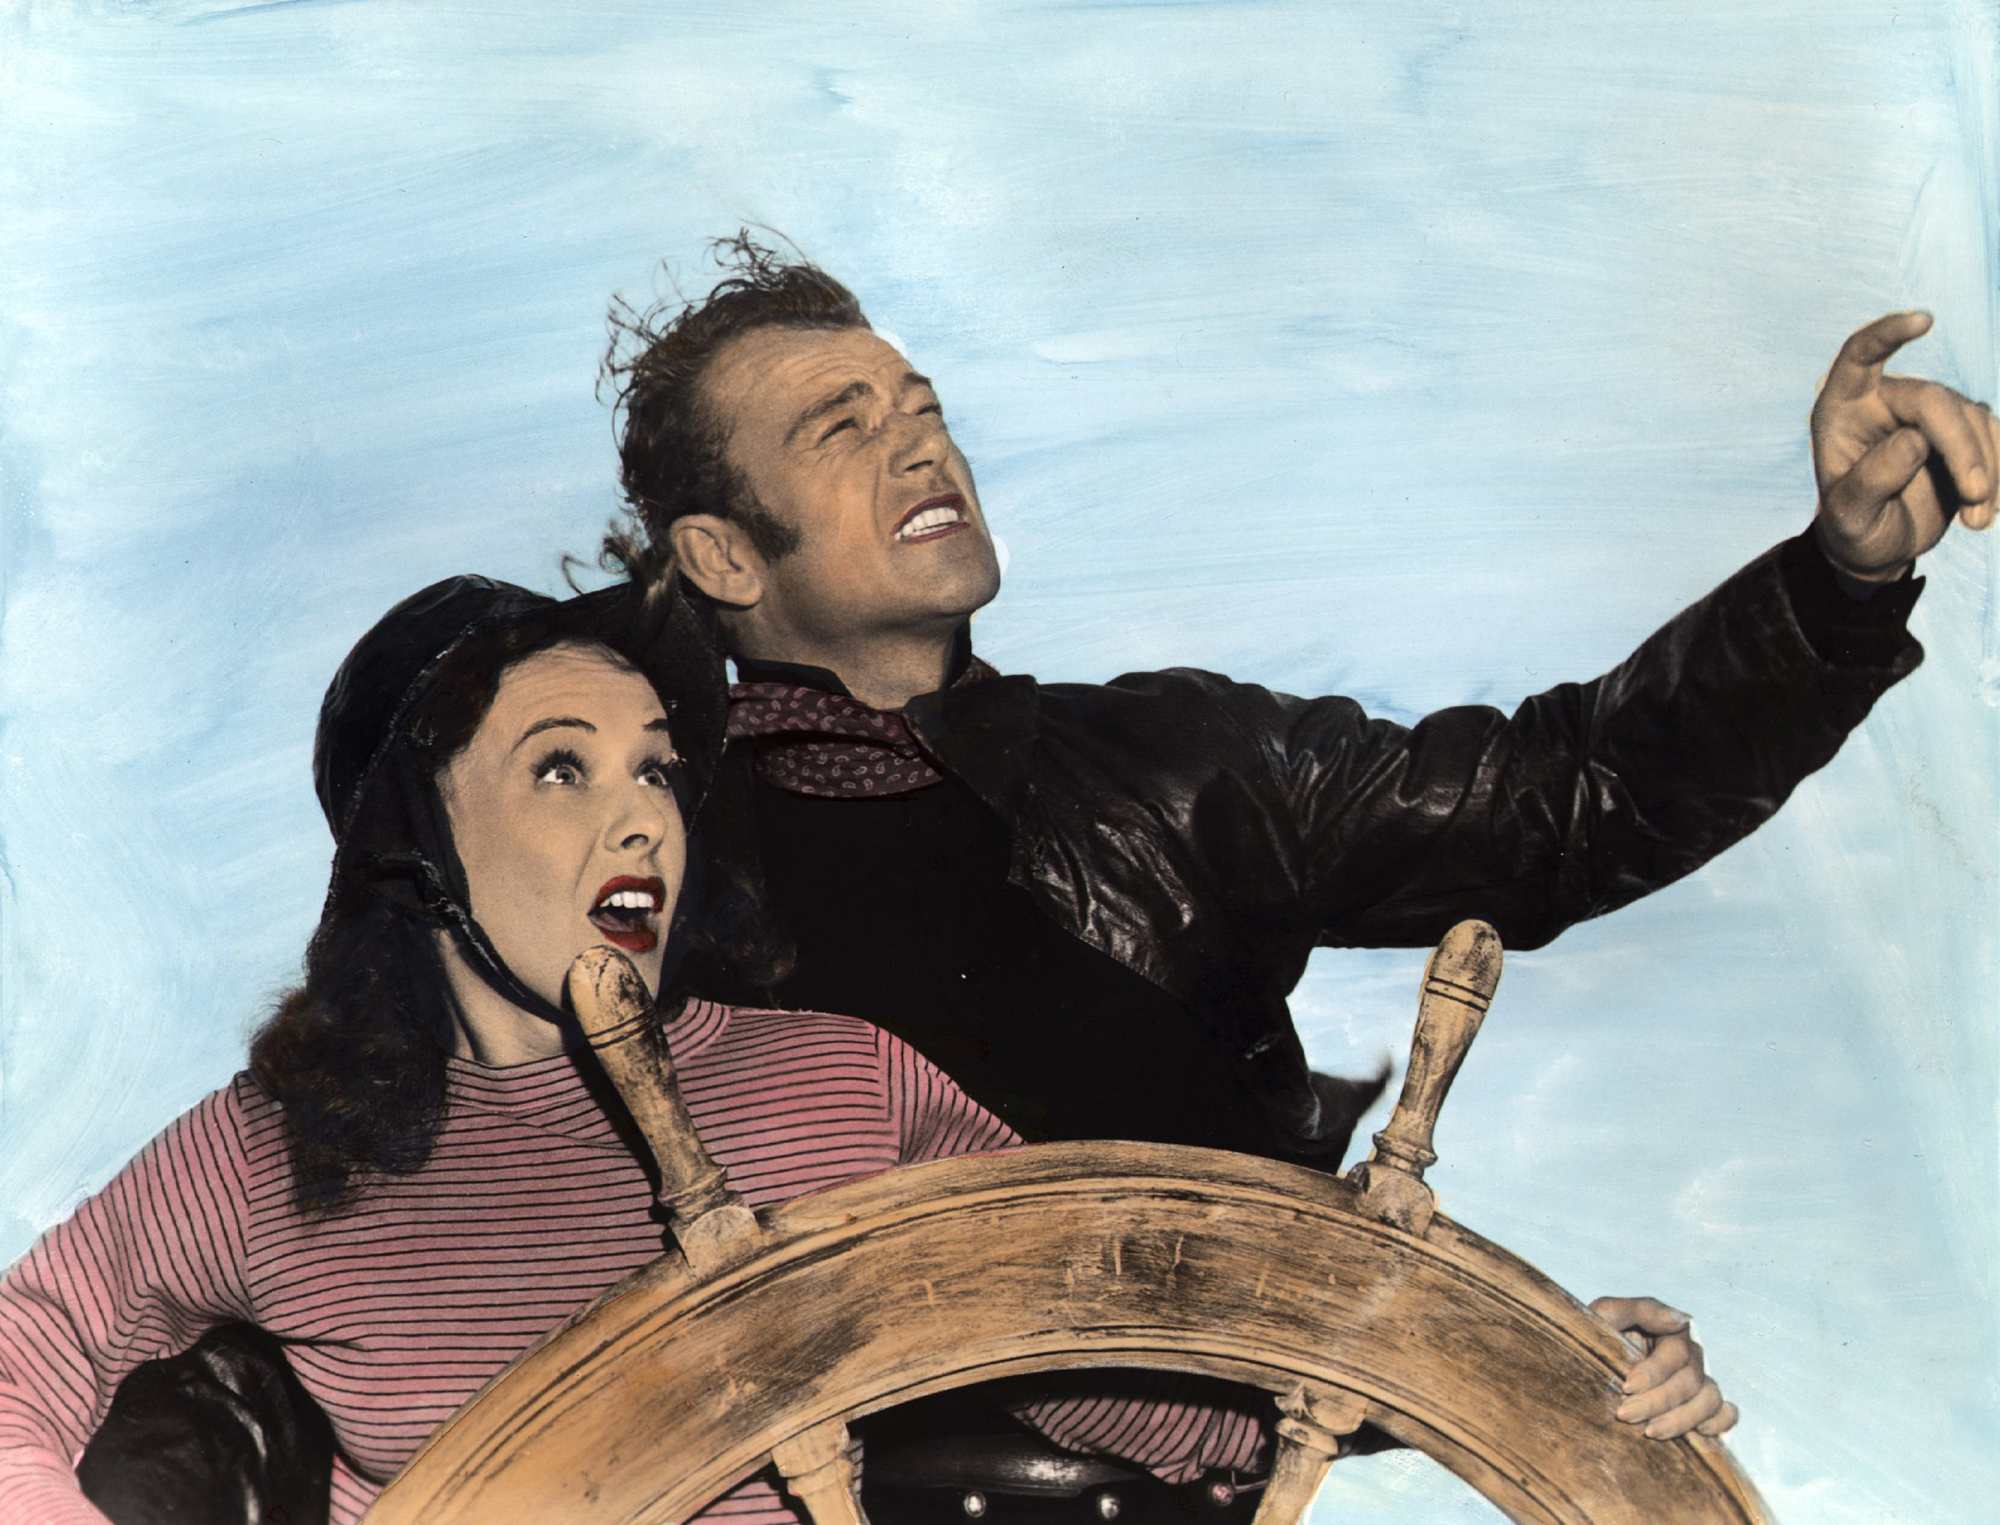 'Reap the Wild Wind' Paulette Goddard as Loxi Claiborne and John Wayne as Captain Jack Stuart, the first of his character deaths. They're standing behind the ship wheel looking shocked.